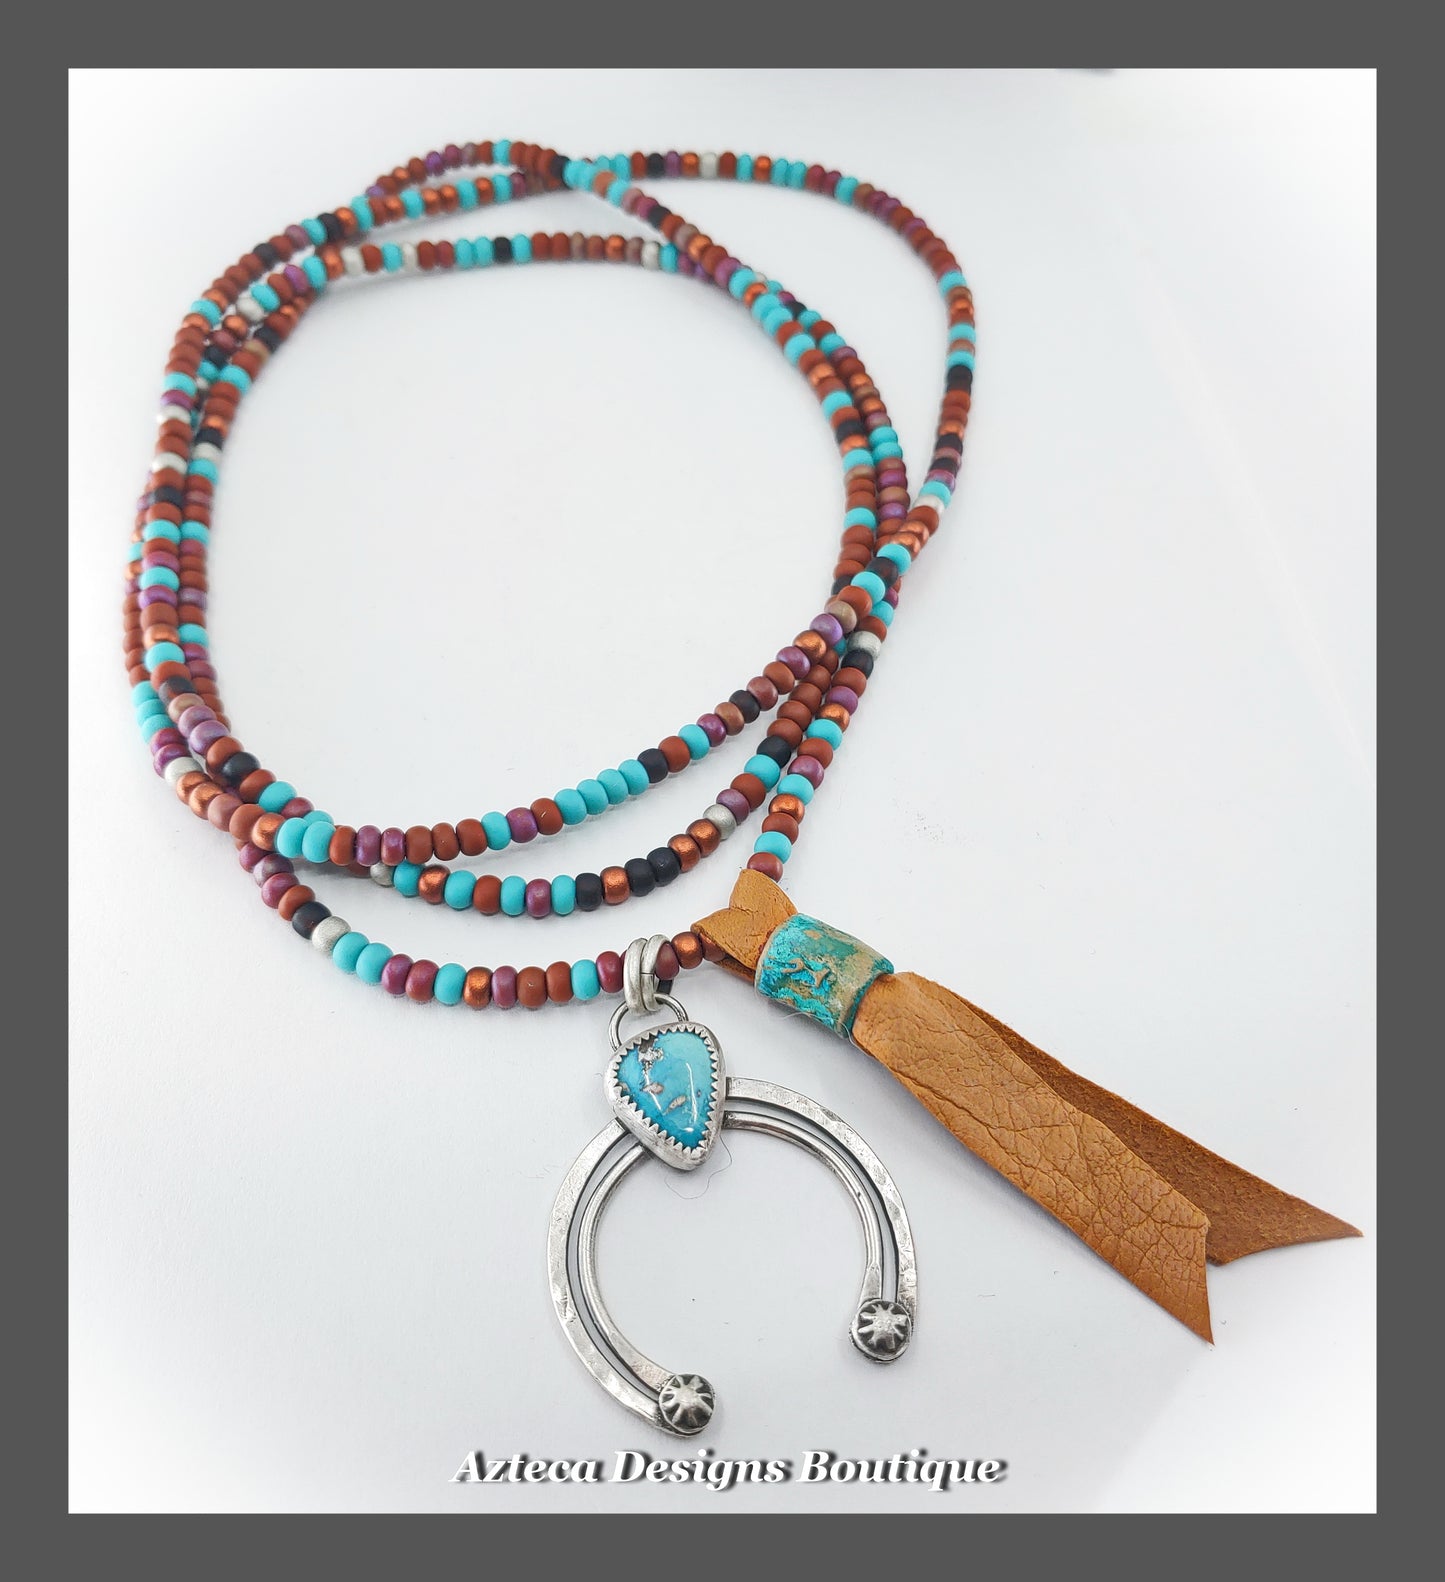 Pinto Valley Turquoise Long Beaded Necklace + Hand Fabricated Argentium Silver + Leather + Glass Beads